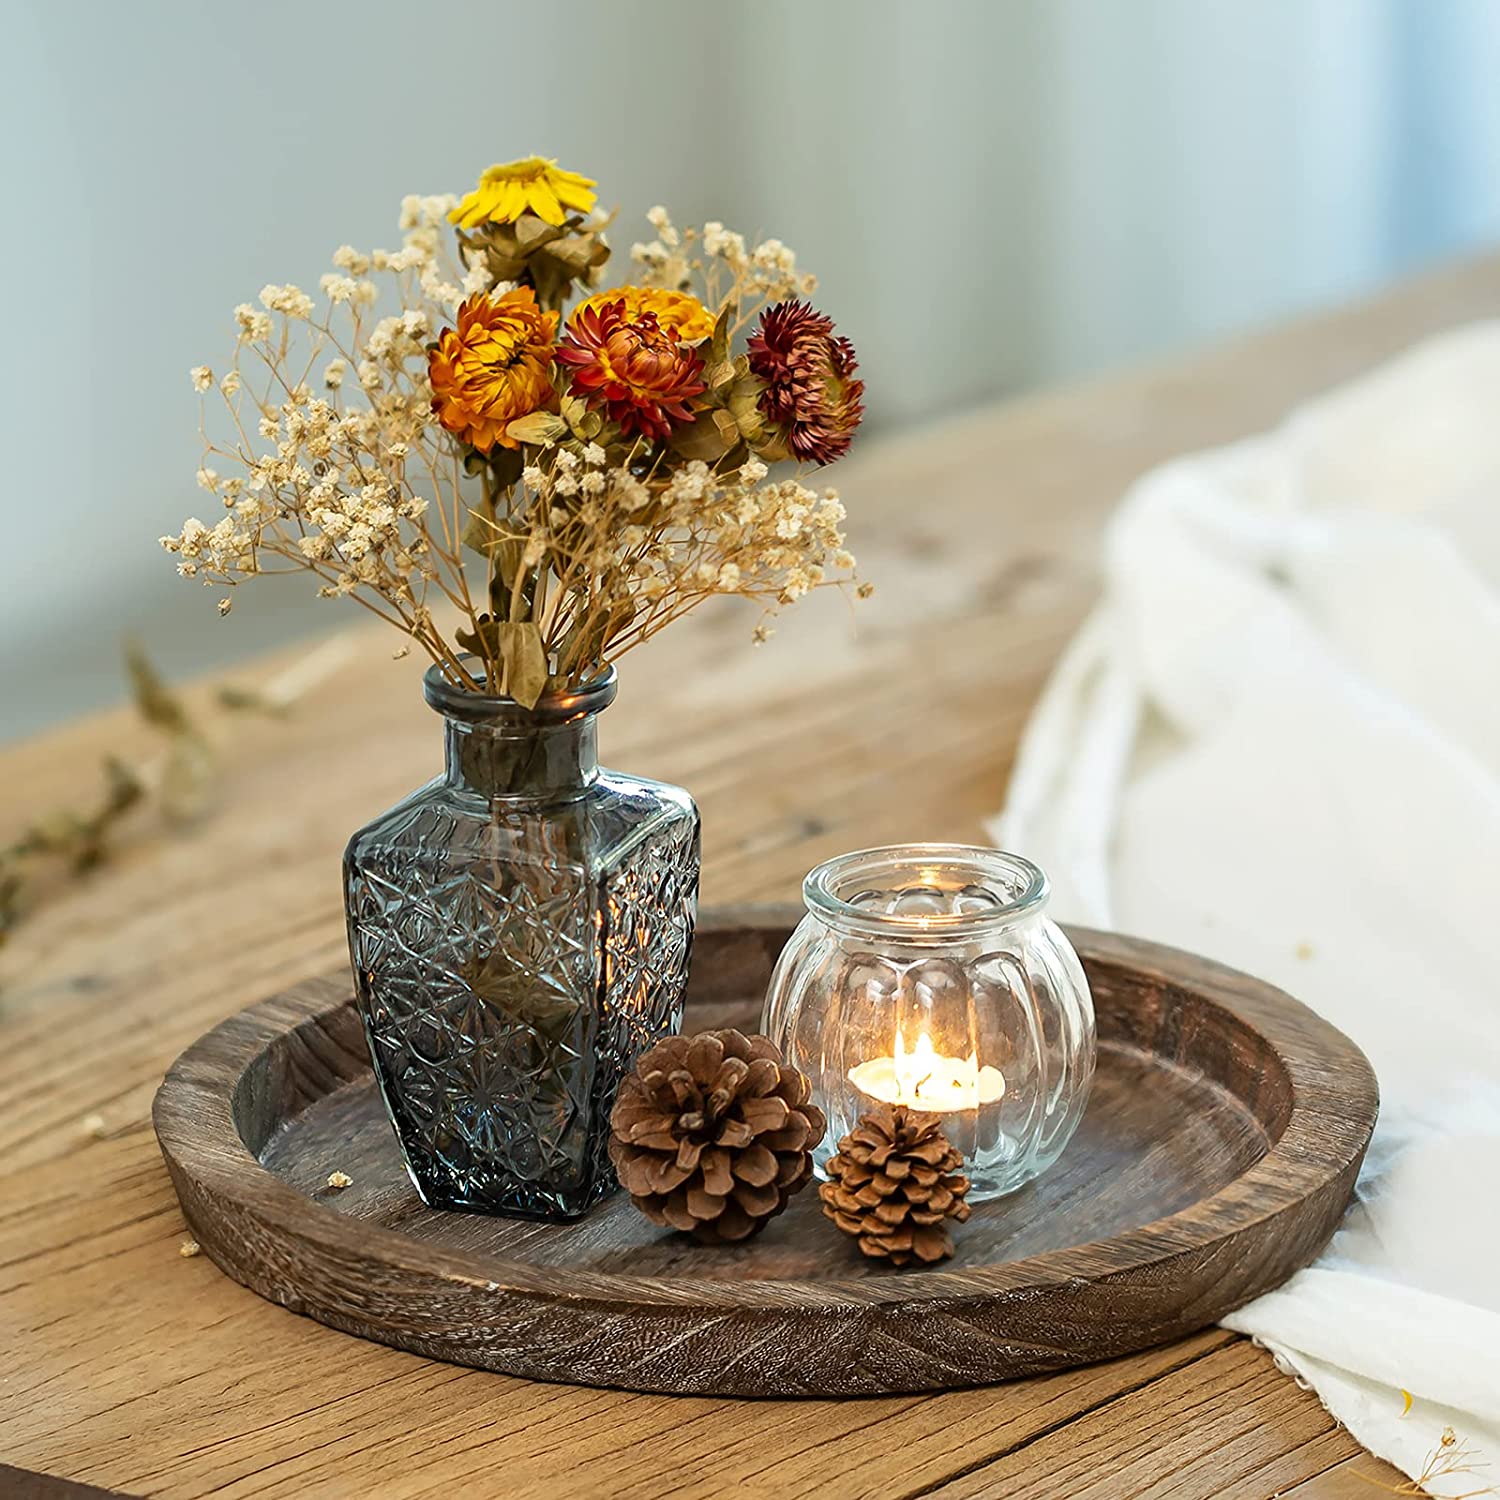 Wooden Decorative Tray Candle Holder: Round Wood Tray Home Decor, Small  Rustic Trays for Coffee Table, Ottoman, Table Centerpieces for Dining Room,  Living Room, Farmhouse Kitchen - Rustic 